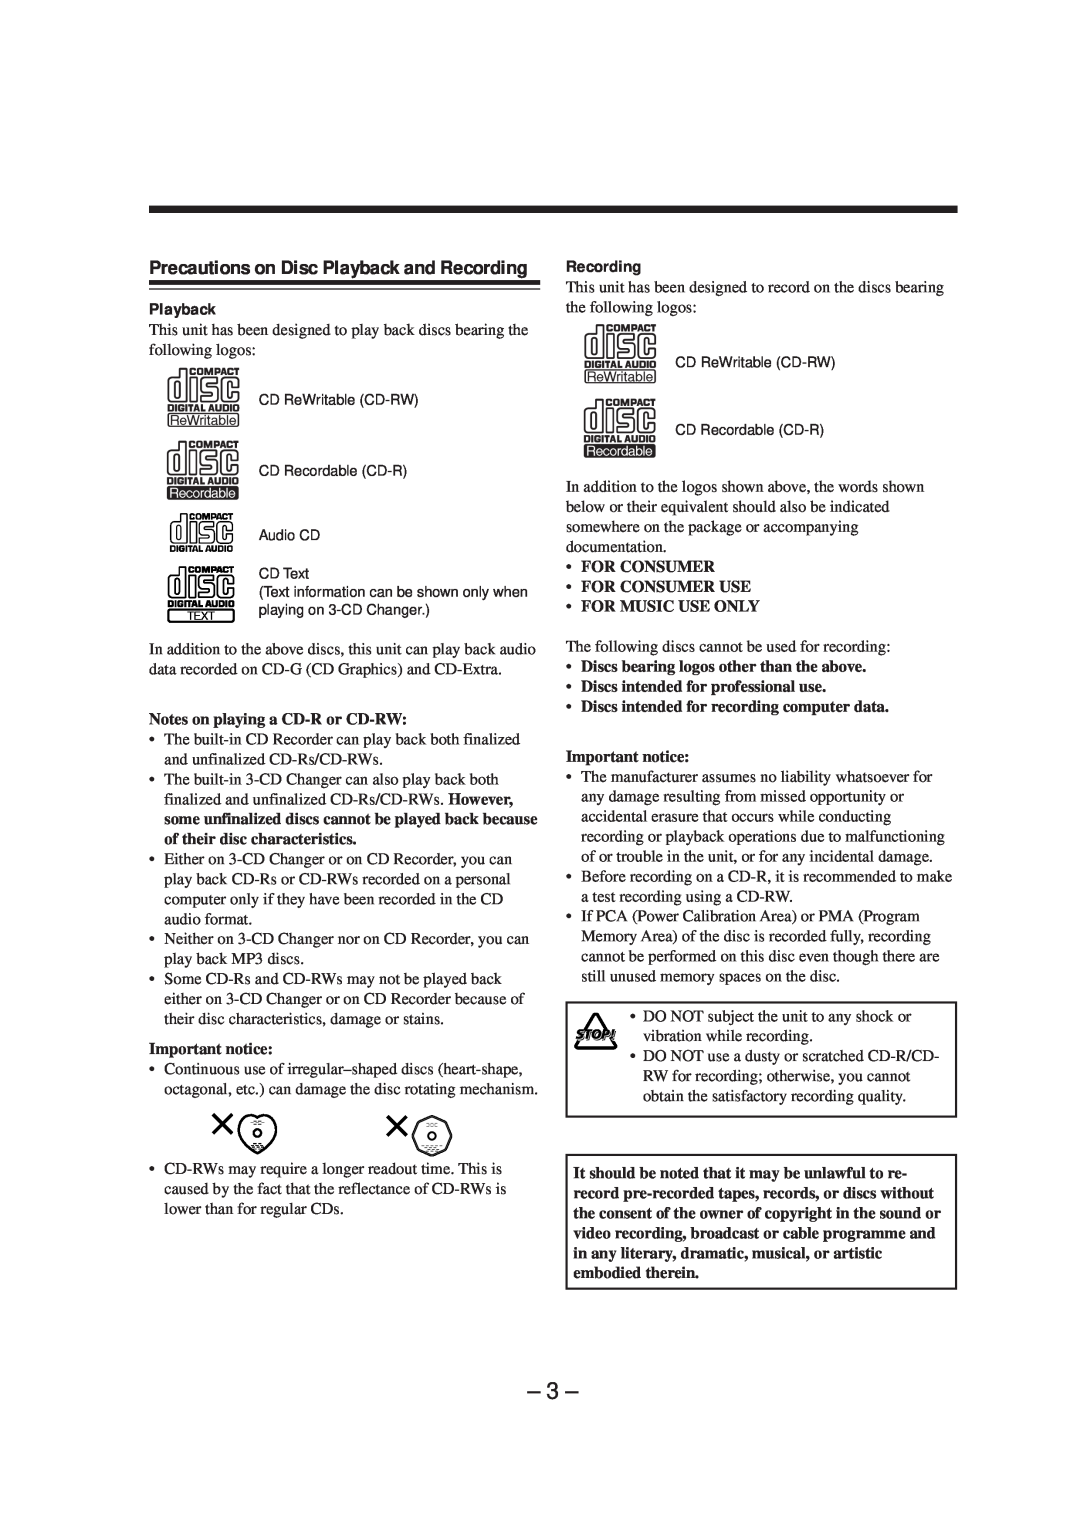 JVC LVT0749-003A, CA-NXCDR7R manual Precautions on Disc Playback and Recording 